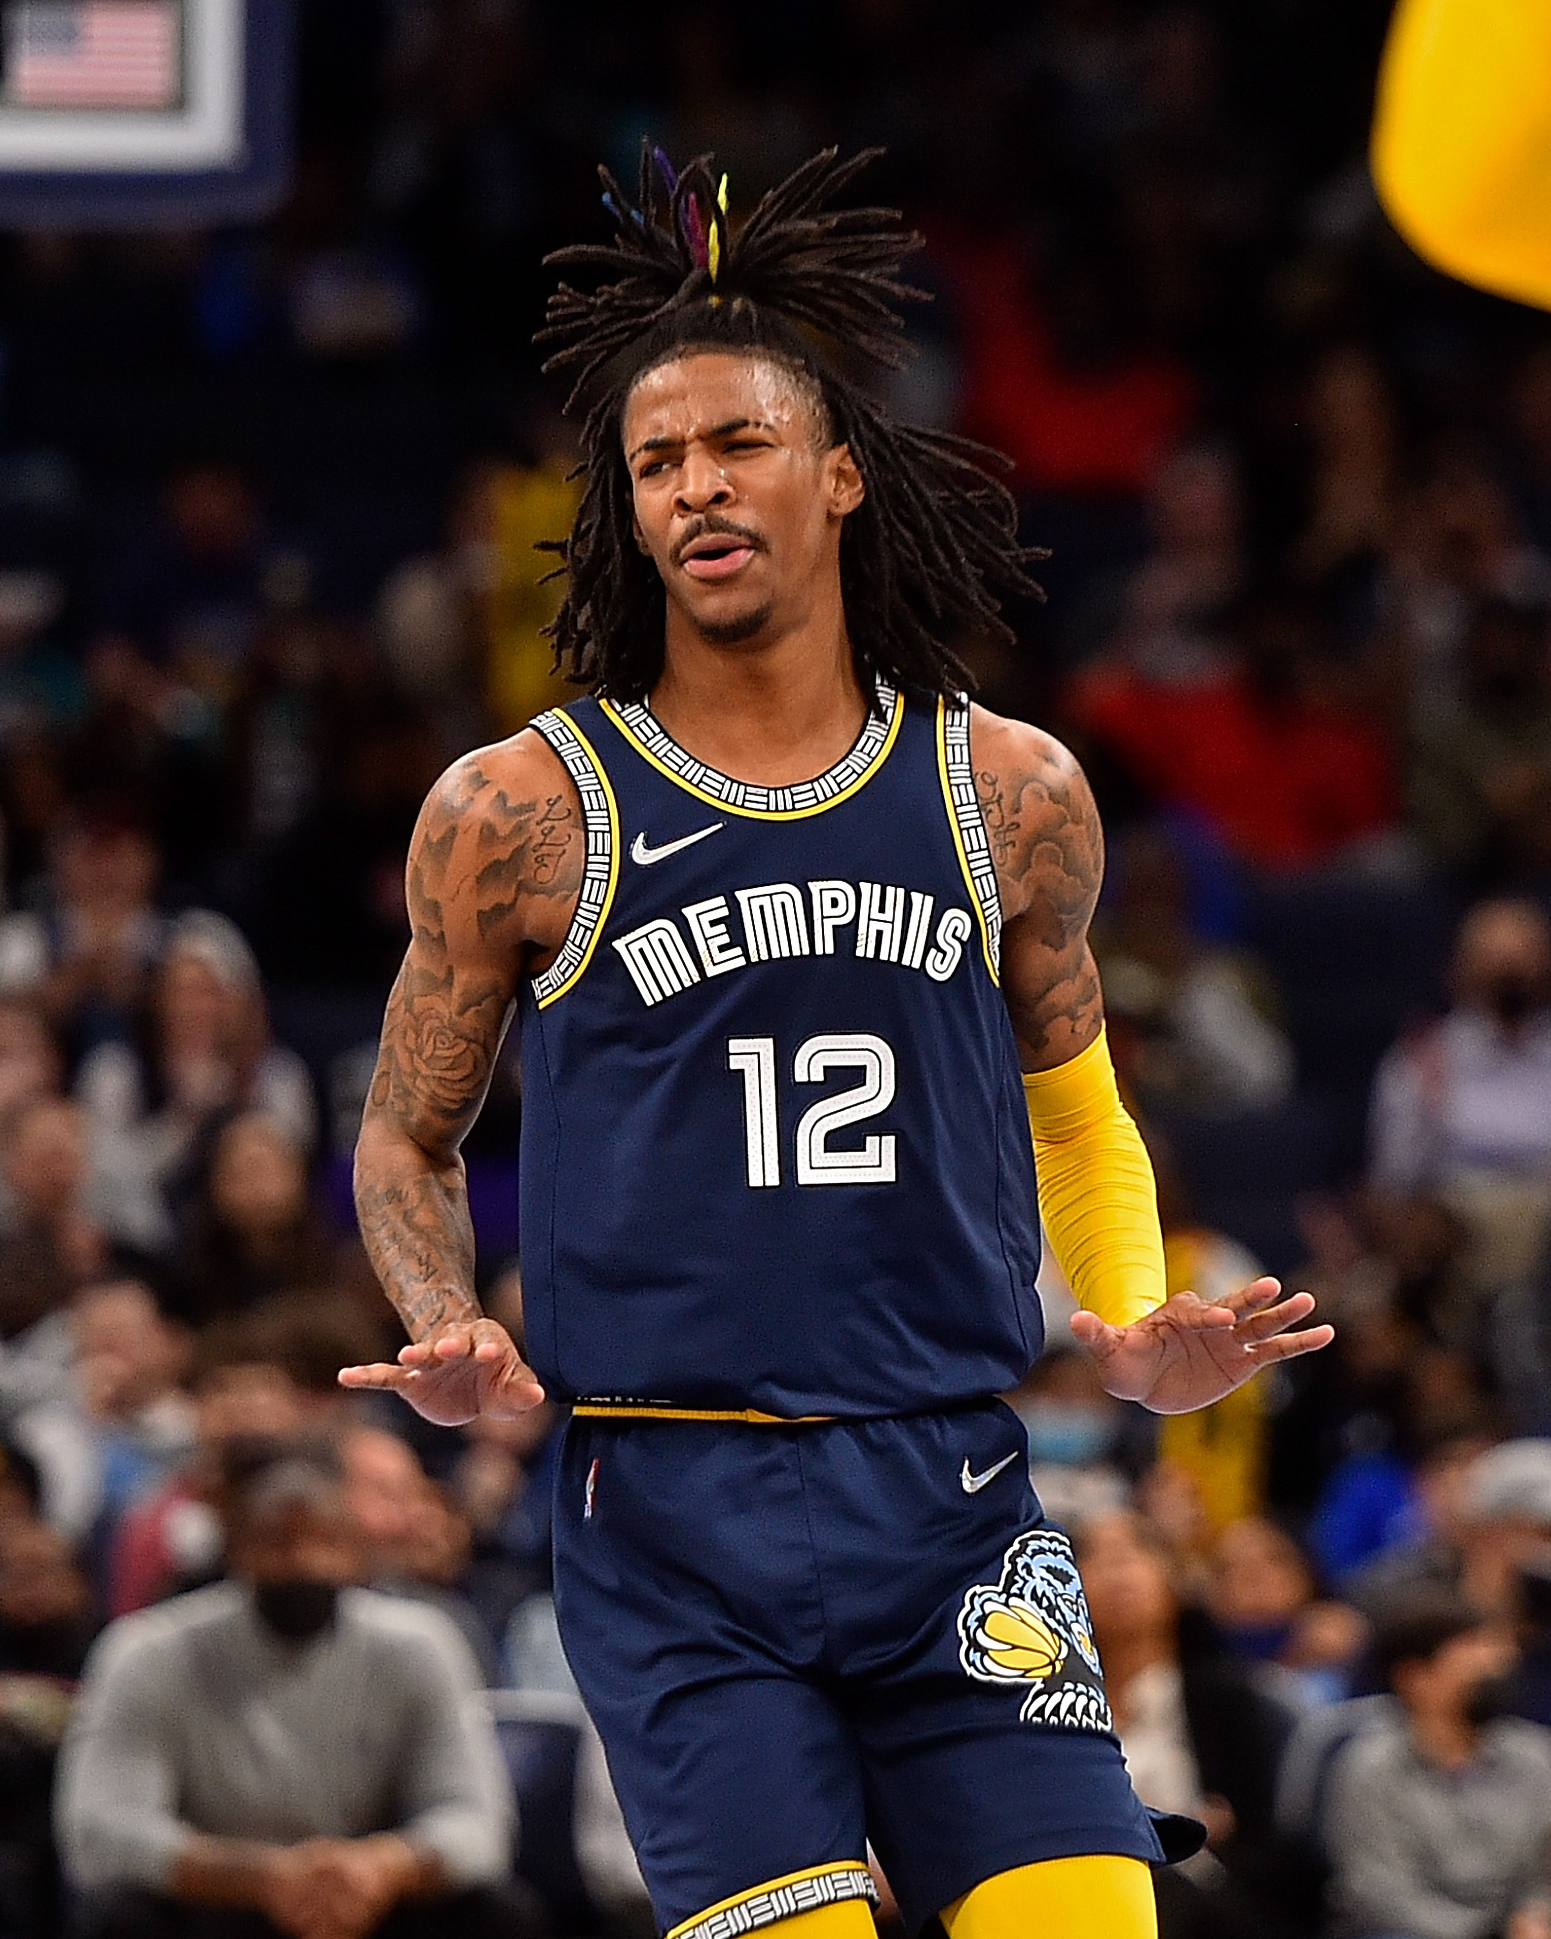 CBS Sports on X: Most points in a single game in Grizzlies history,  including playoffs: @JaMorant - 52 (tonight) Ja Morant - 47 Ja Morant - 46  Mike Miller - 45 Pau